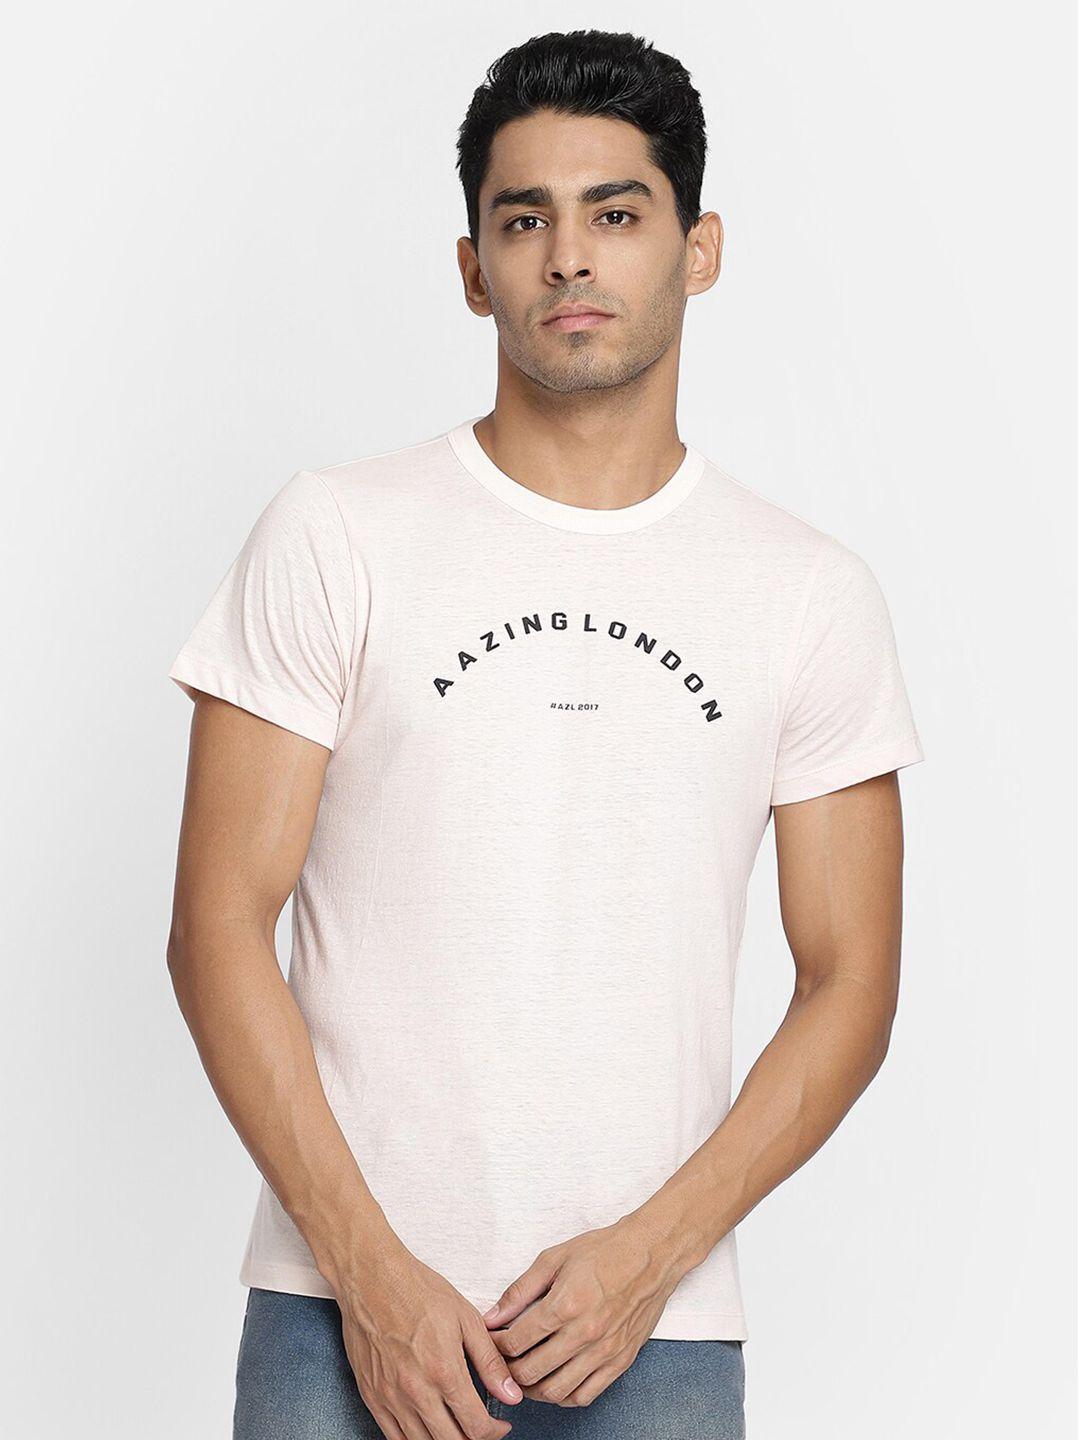 aazing london men peach-coloured typography printed  t-shirt